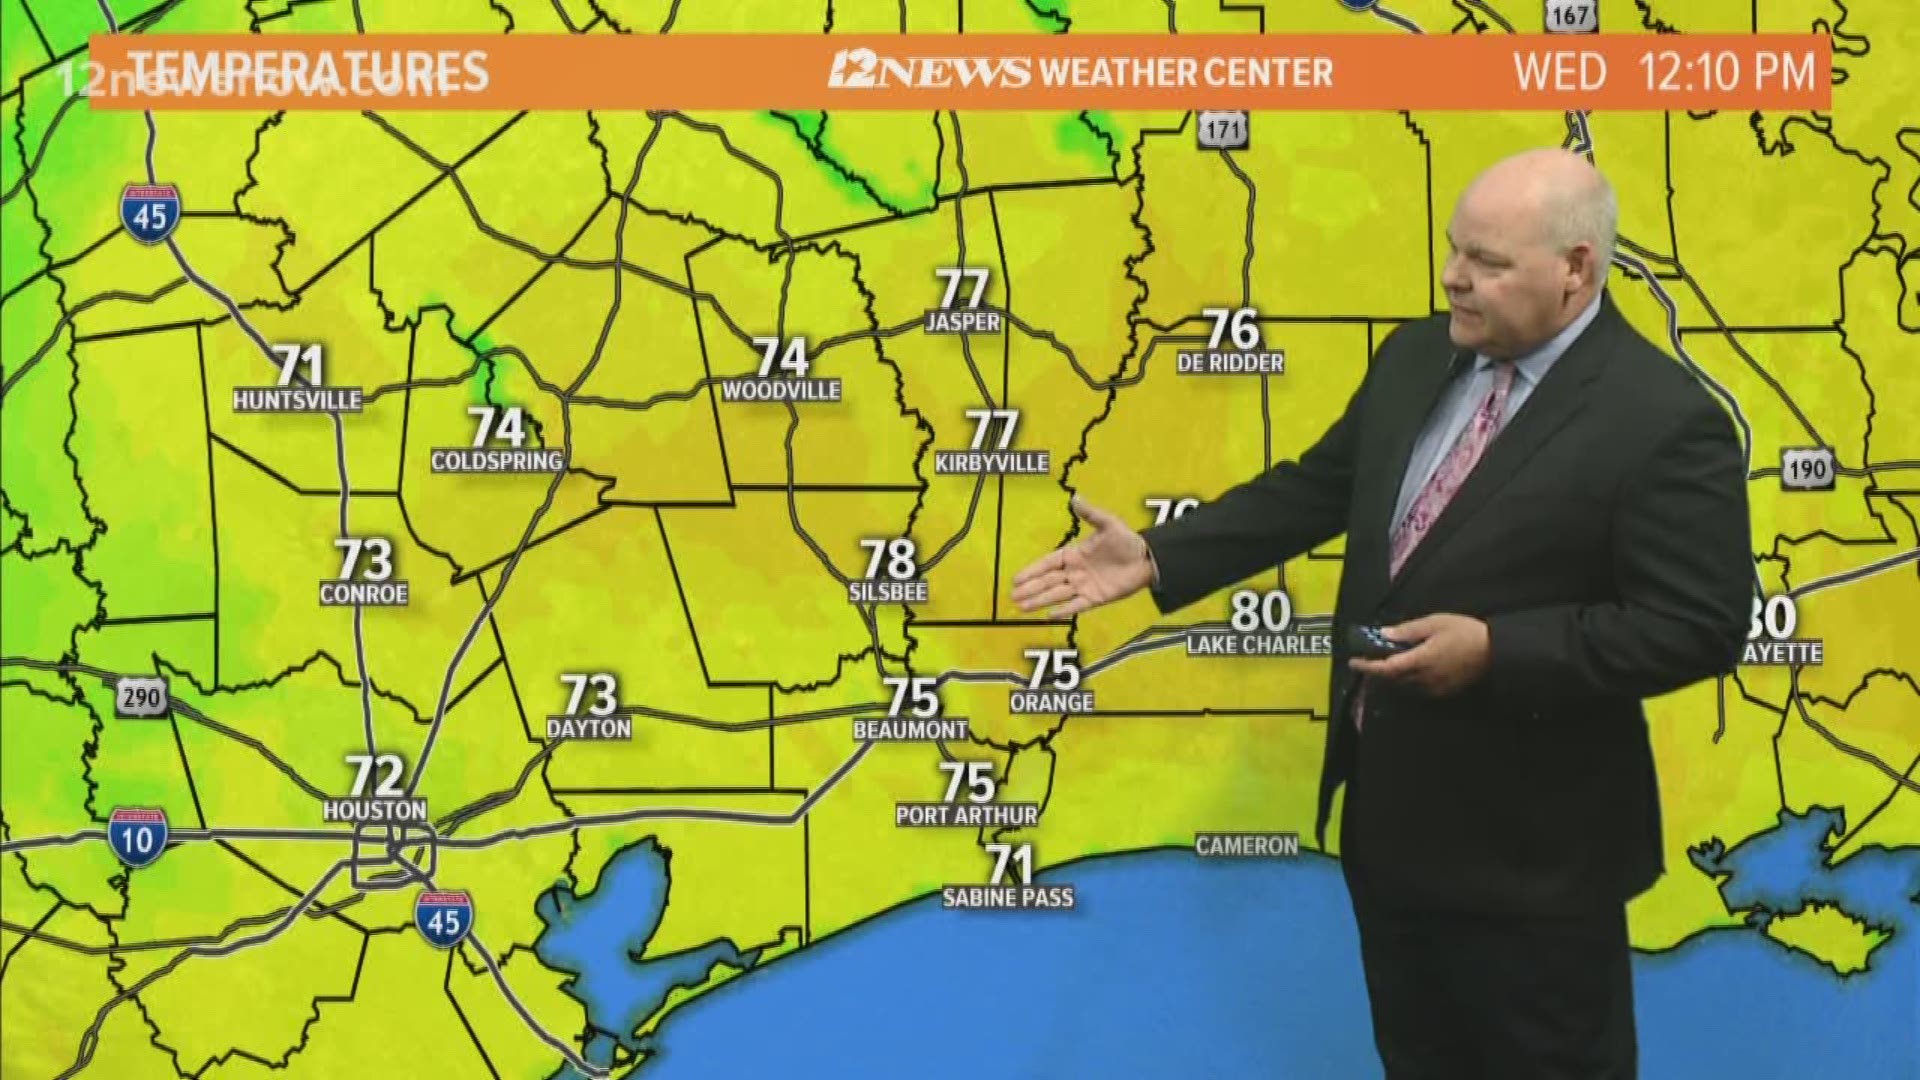 12News meterologist Jeff Gerber says to expect mostly cloudy, warm and humid weather.